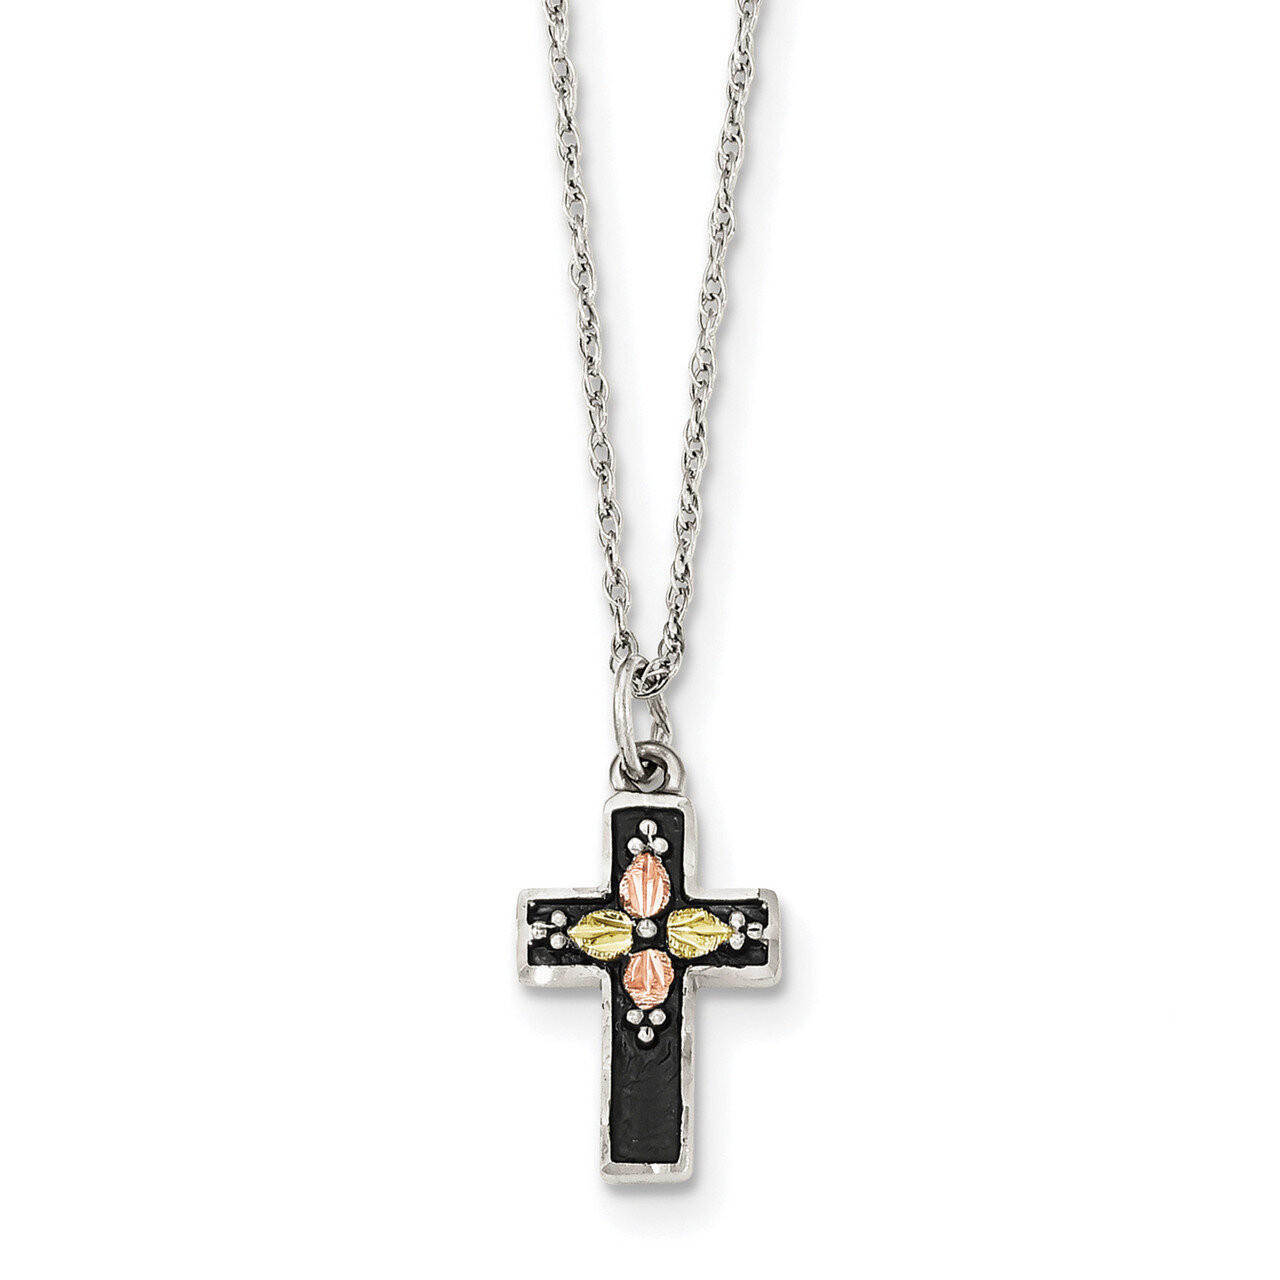 Antiqued Cross Necklace 18 Inch 12k Gold Sterling Silver QBH216-18